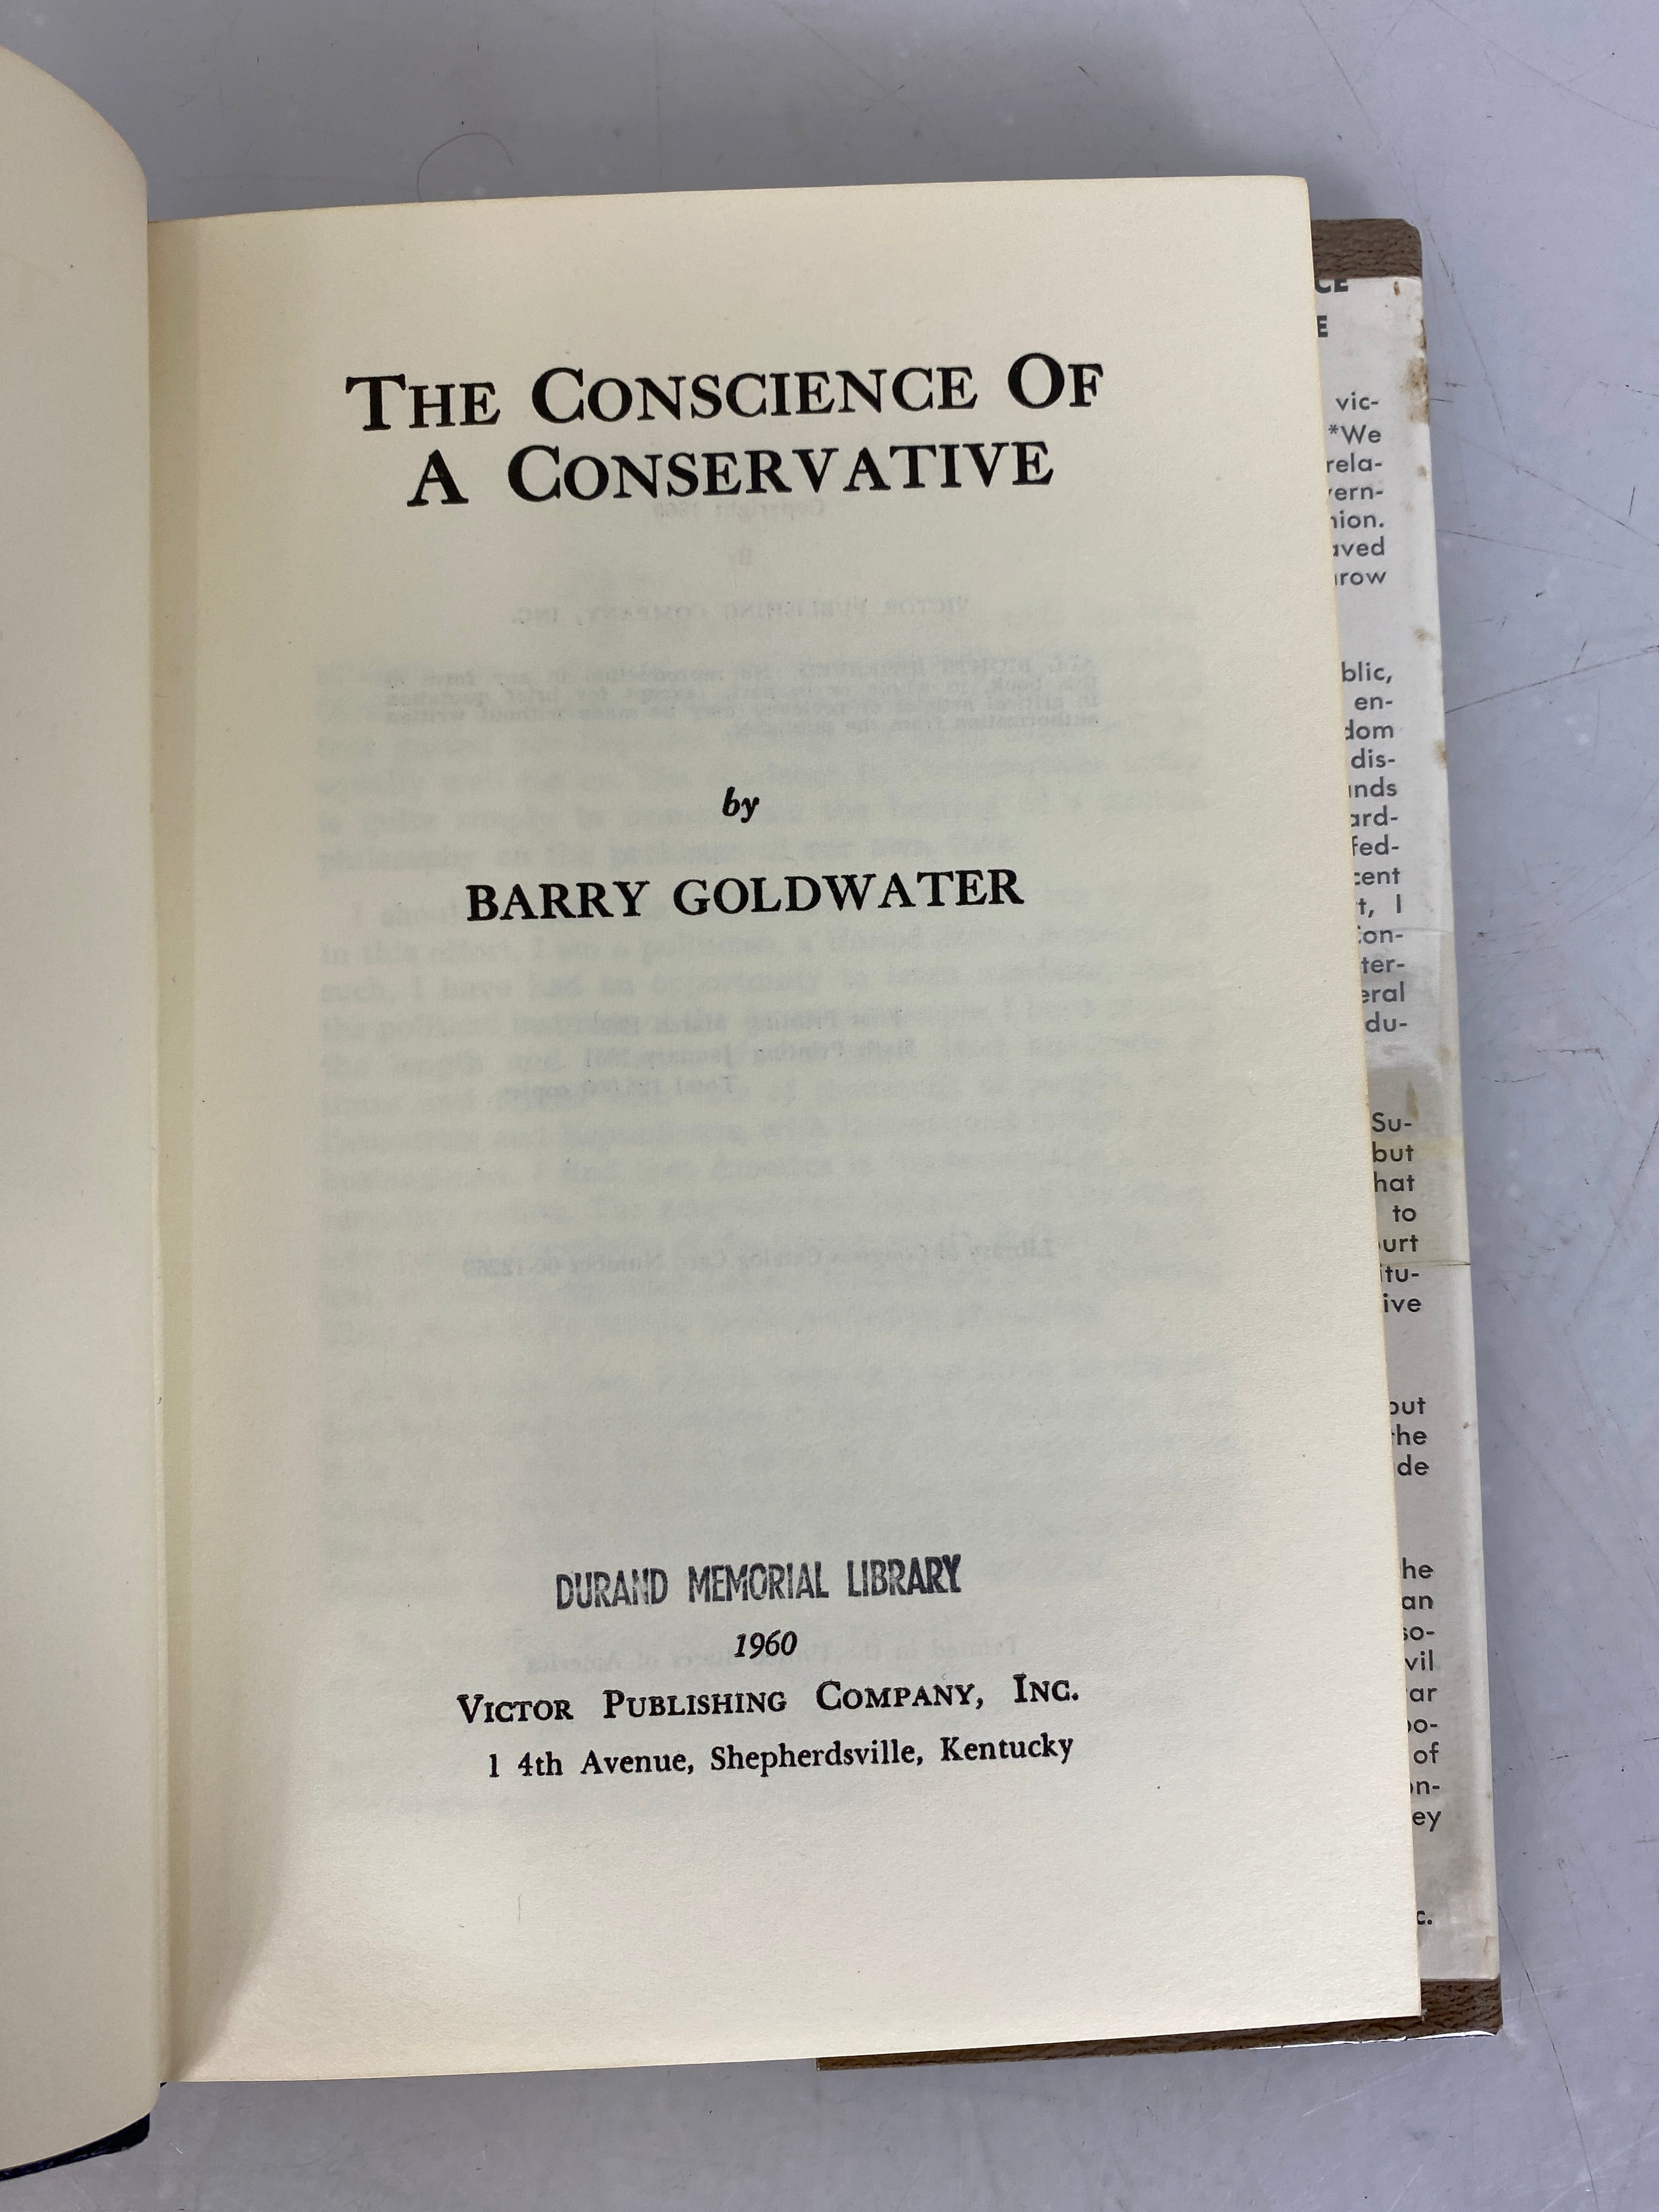 Barry Goldwater The Conscience of a Conservative First Edition 1961 HC DJ